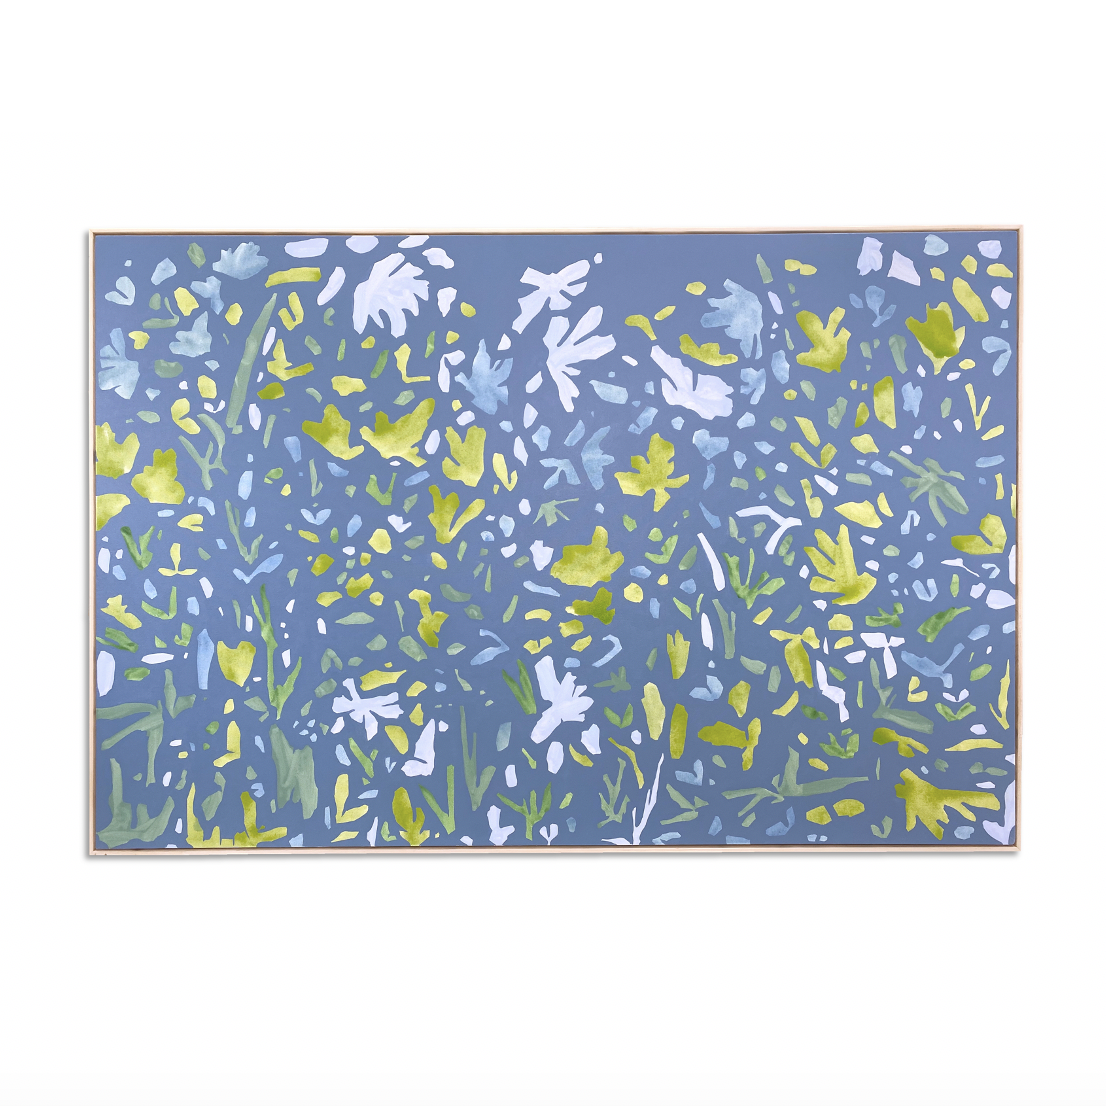 field apart , 48x72, acrylic on canvas, 2020, for web.png